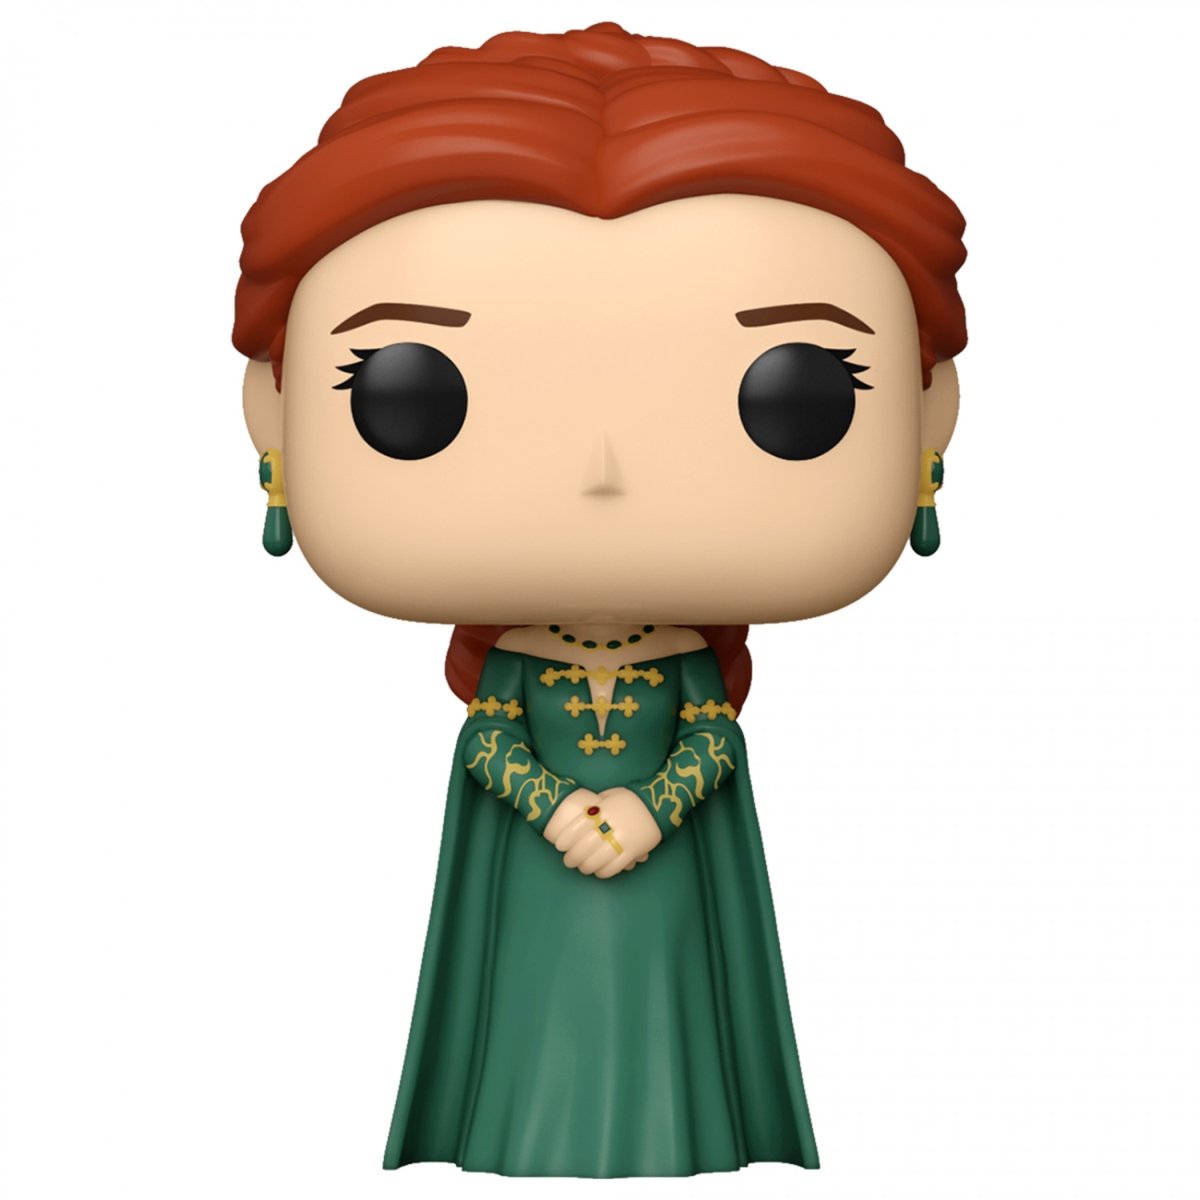 Picture of Game of Thrones 855254 House of the Dragon Alicent Hightower Funko Pop Vinyl Figure